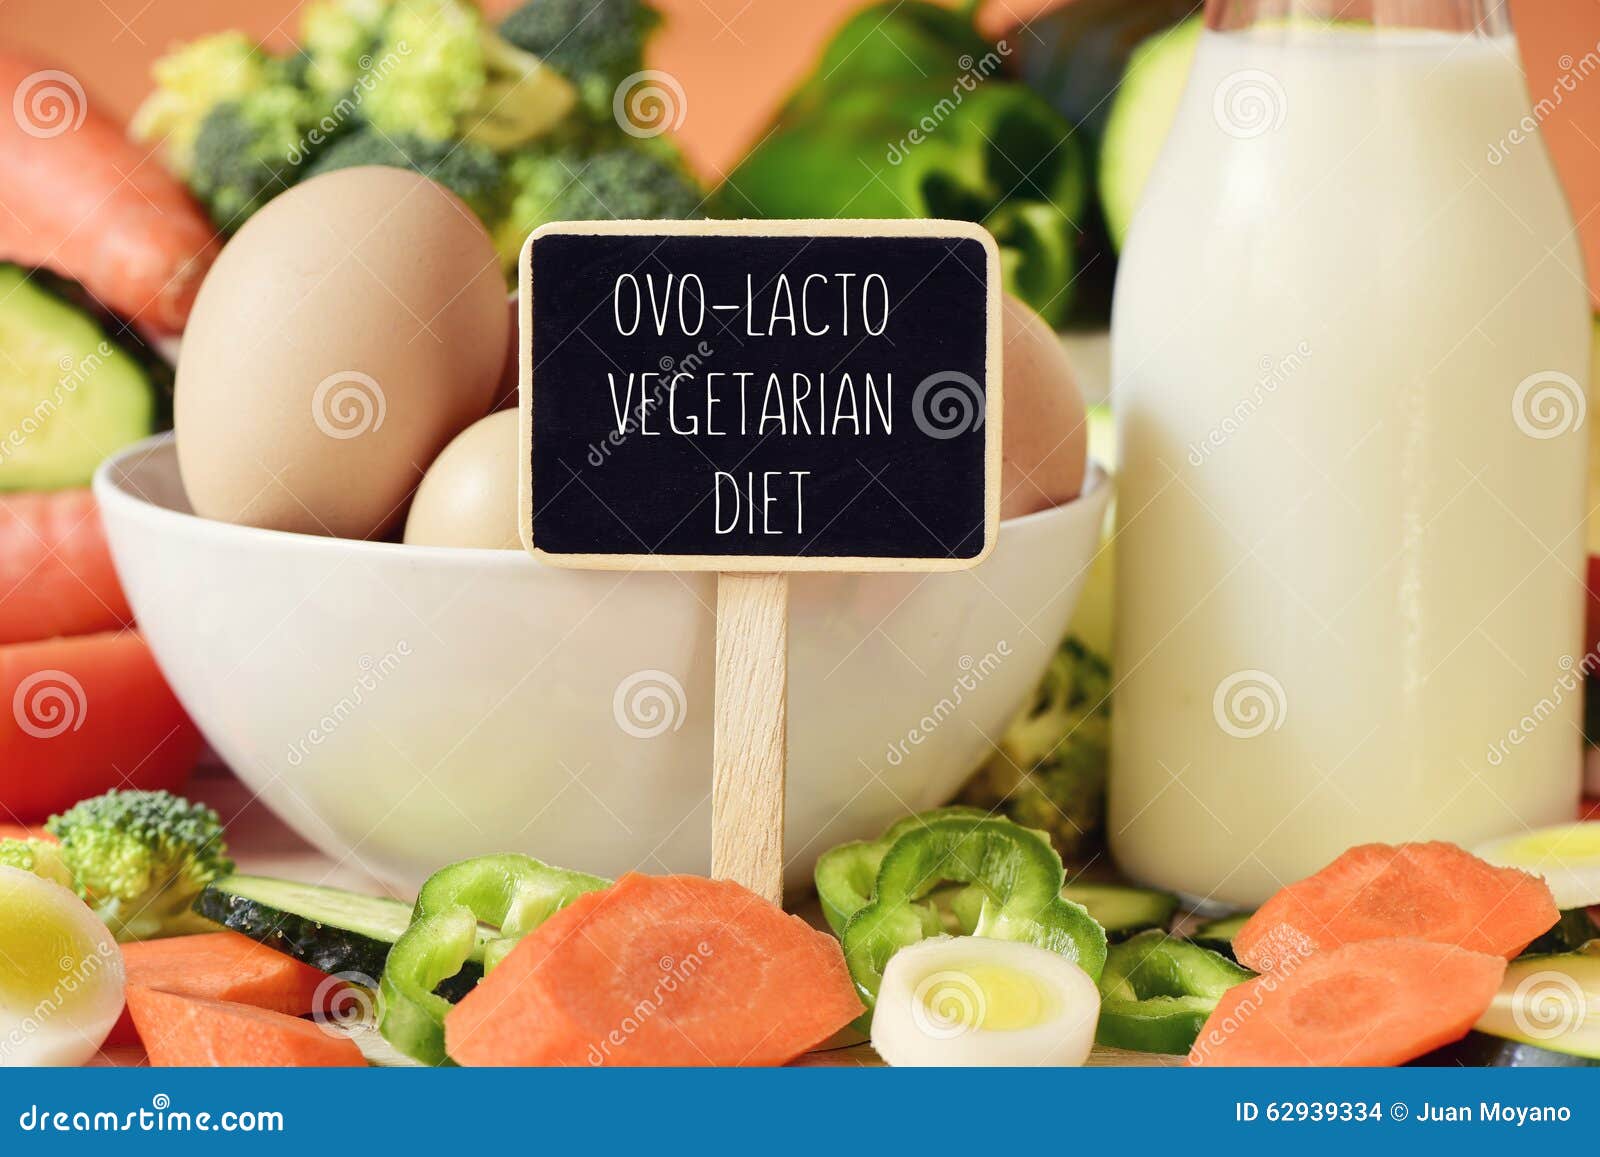 eggs, milk, vegetables and text ovo-lacto vegetarian diet